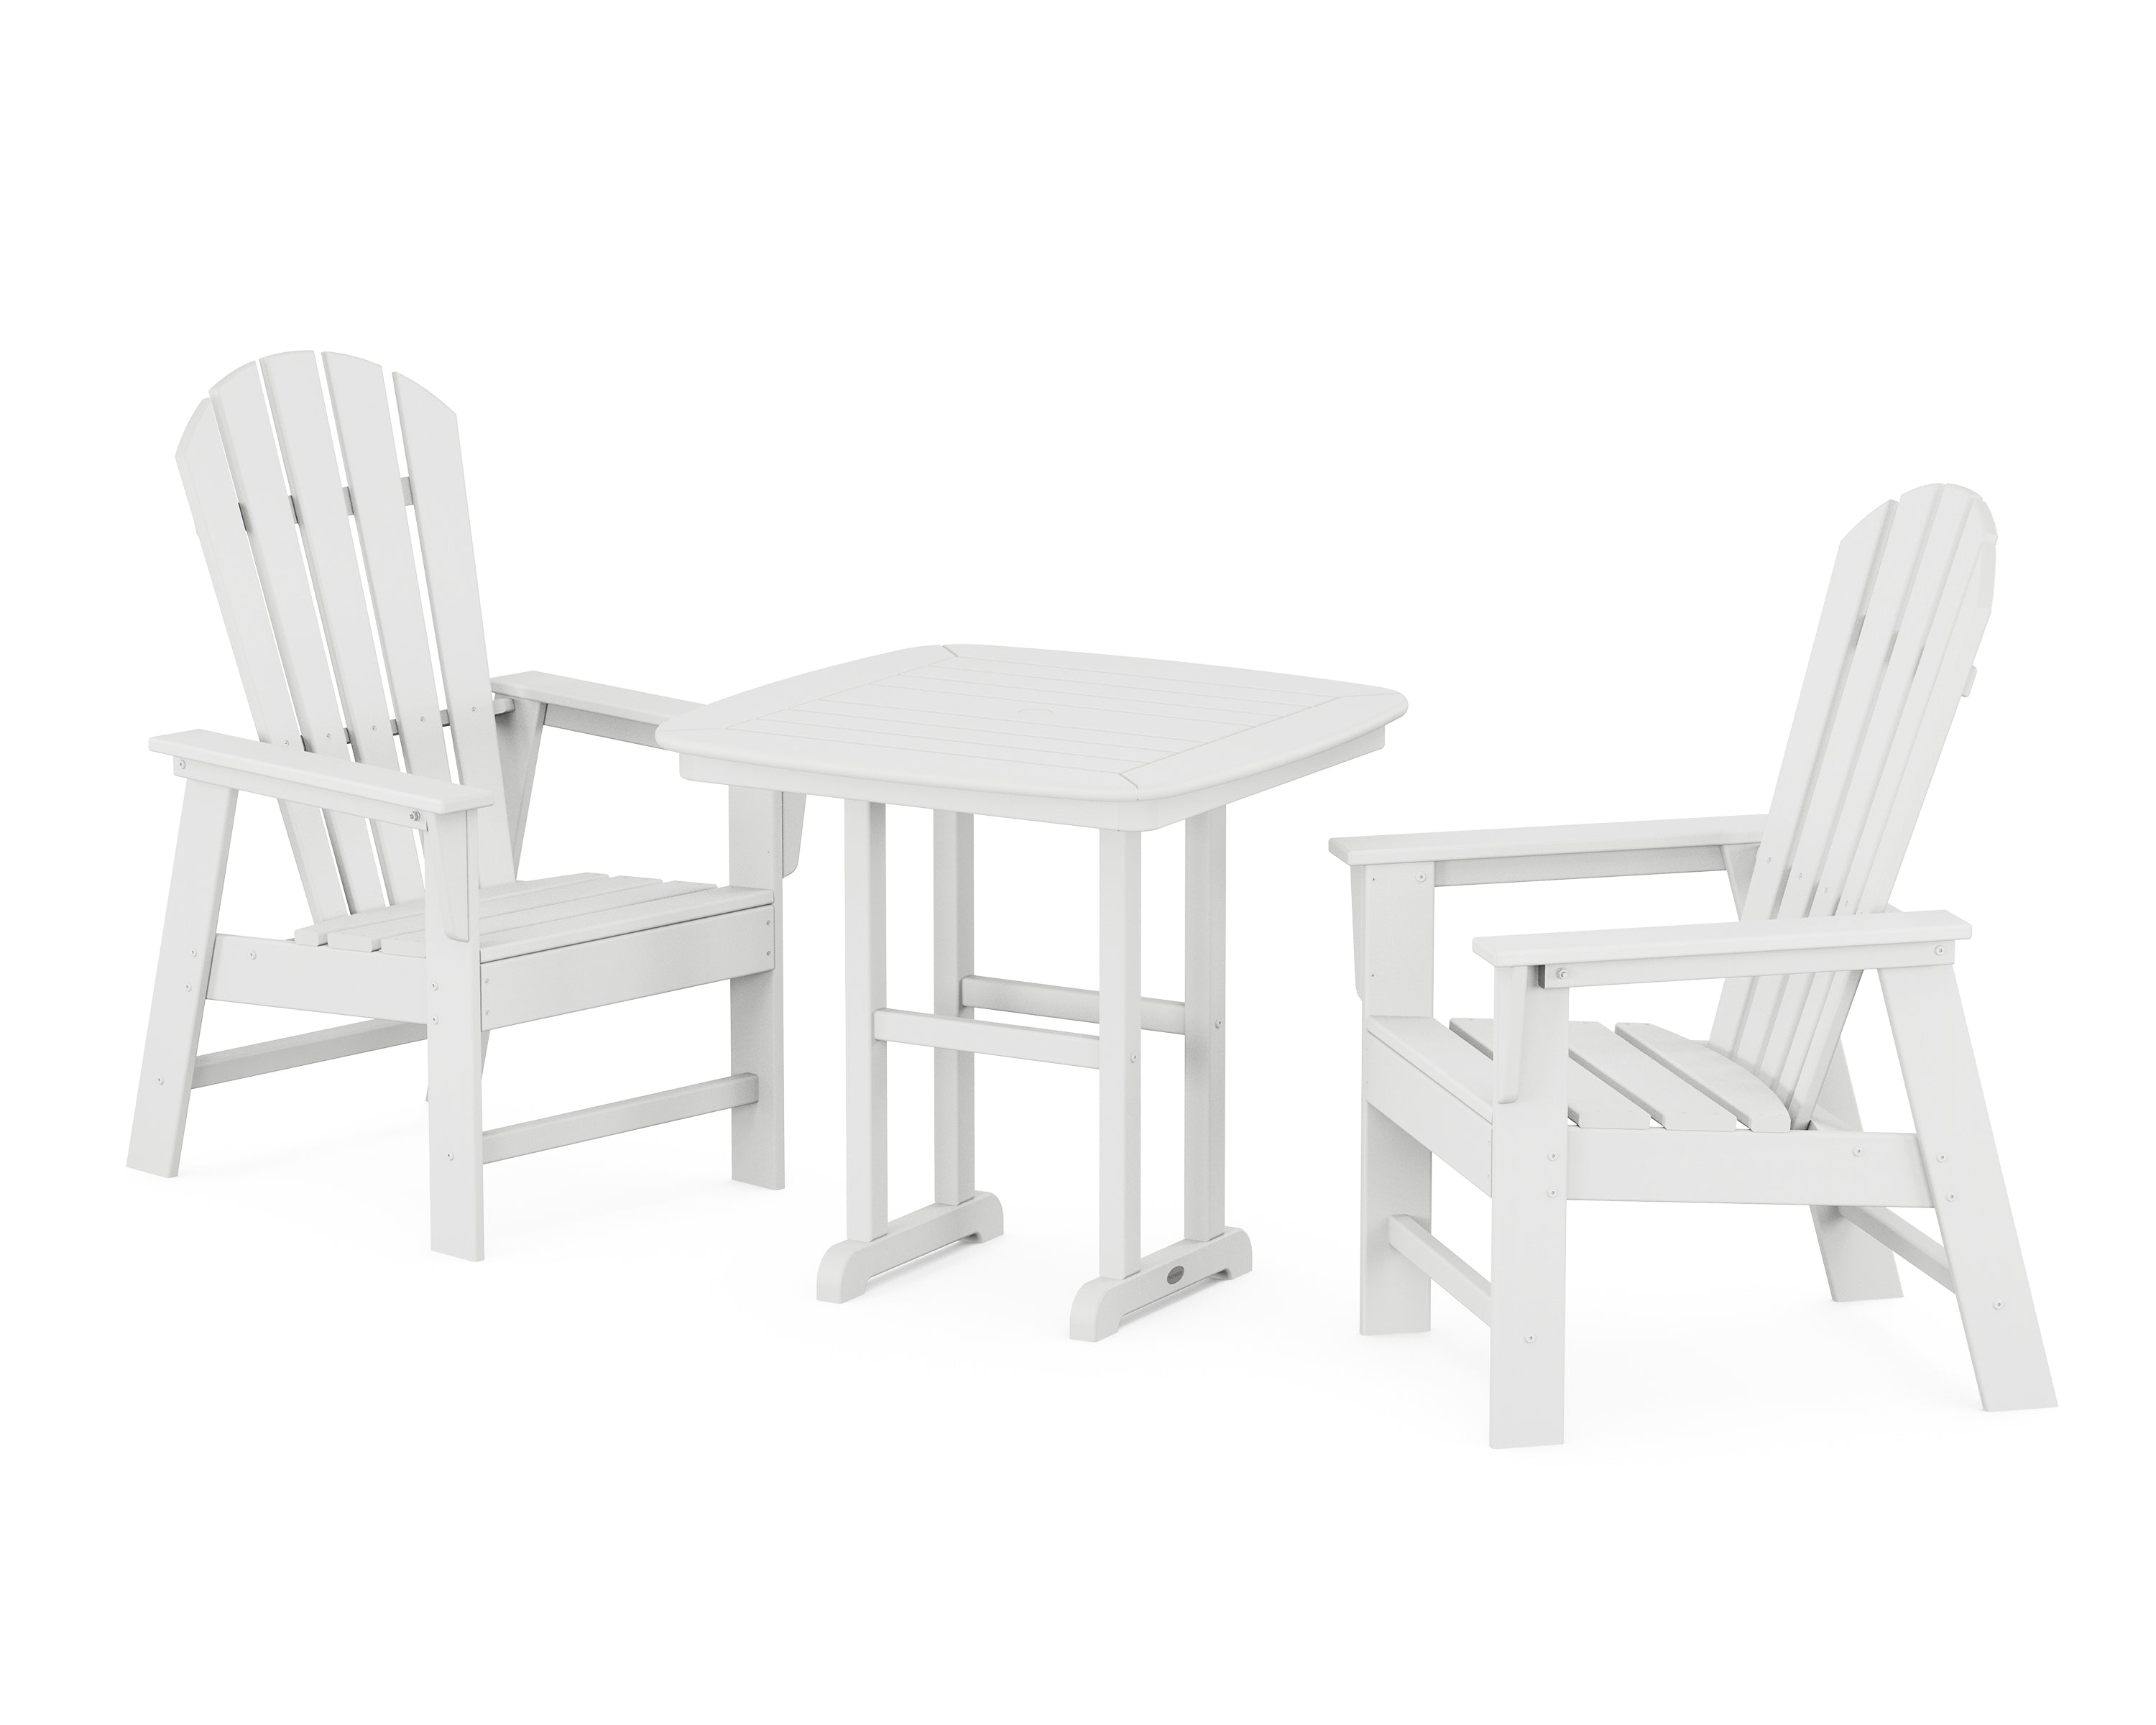 POLYWOOD® South Beach 3-Piece Dining Set in White